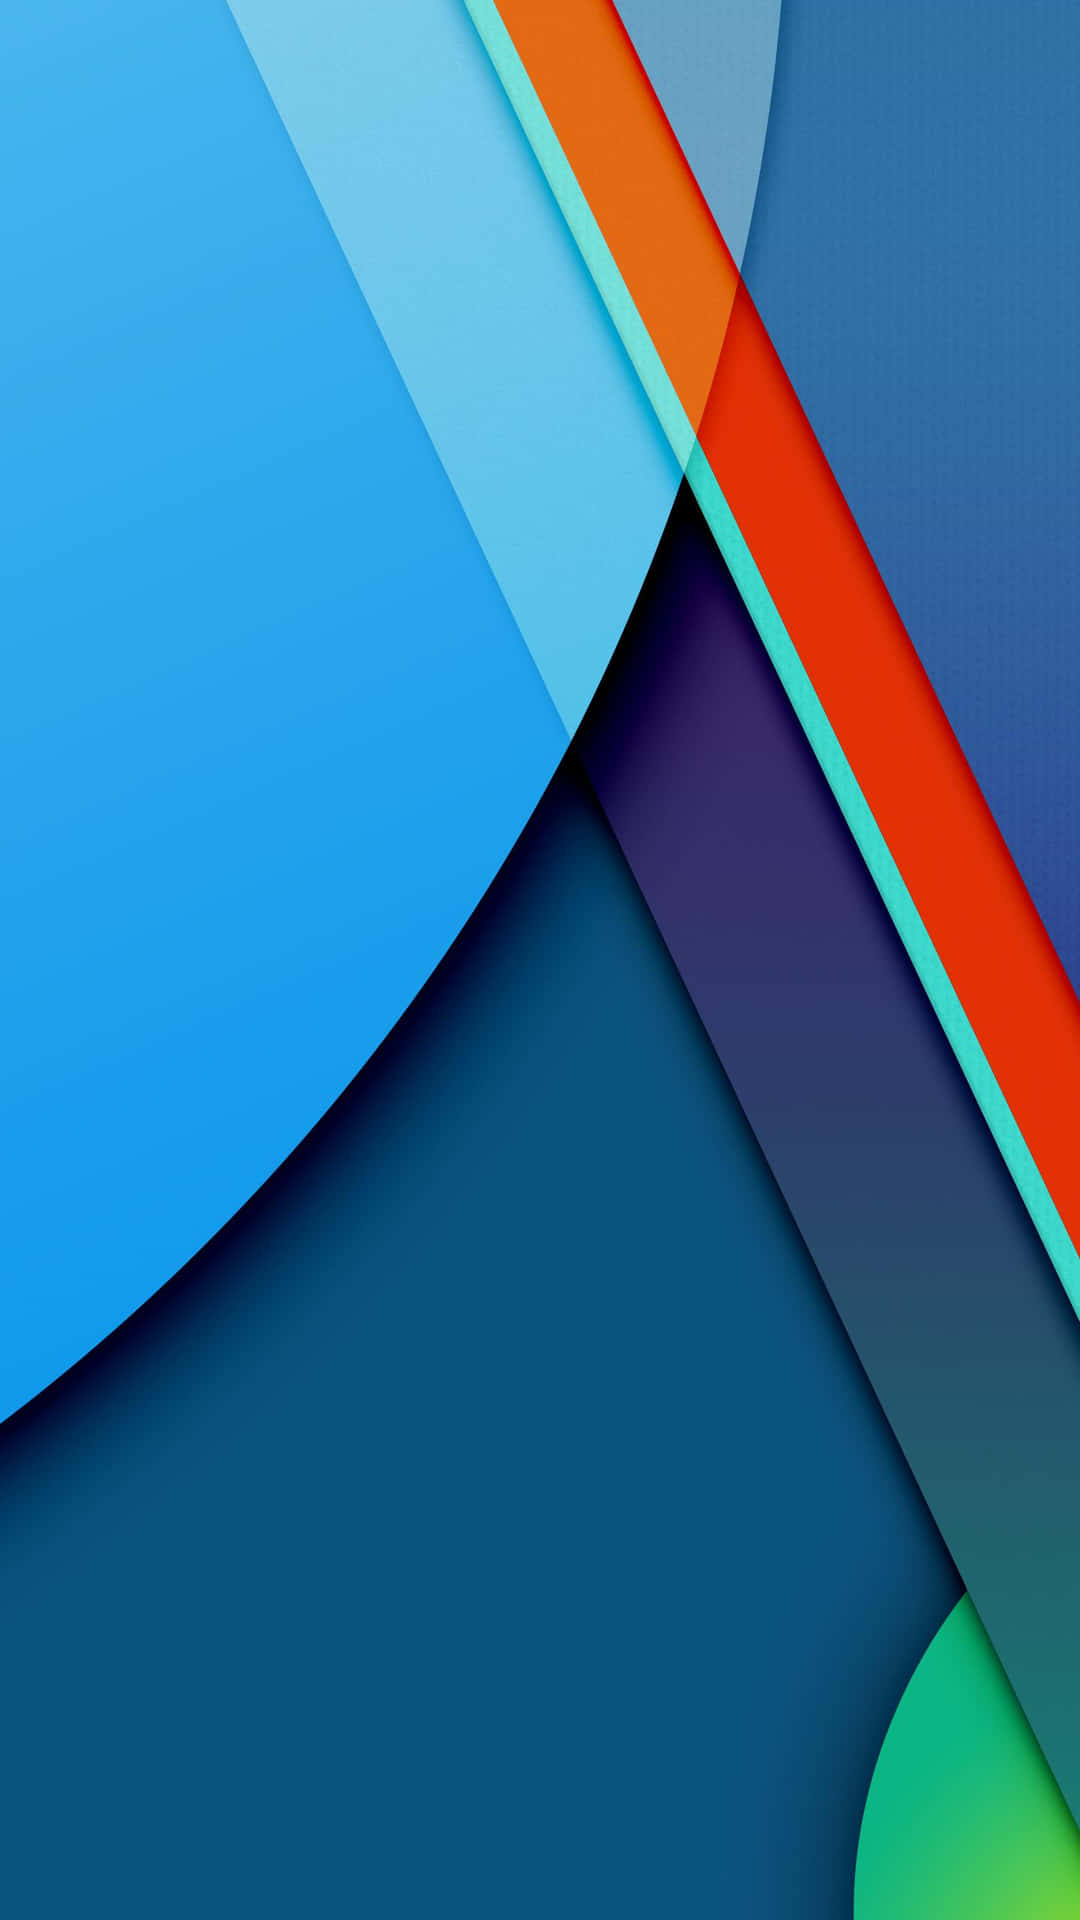 A Colorful Background With A Blue, Orange, And Green Color